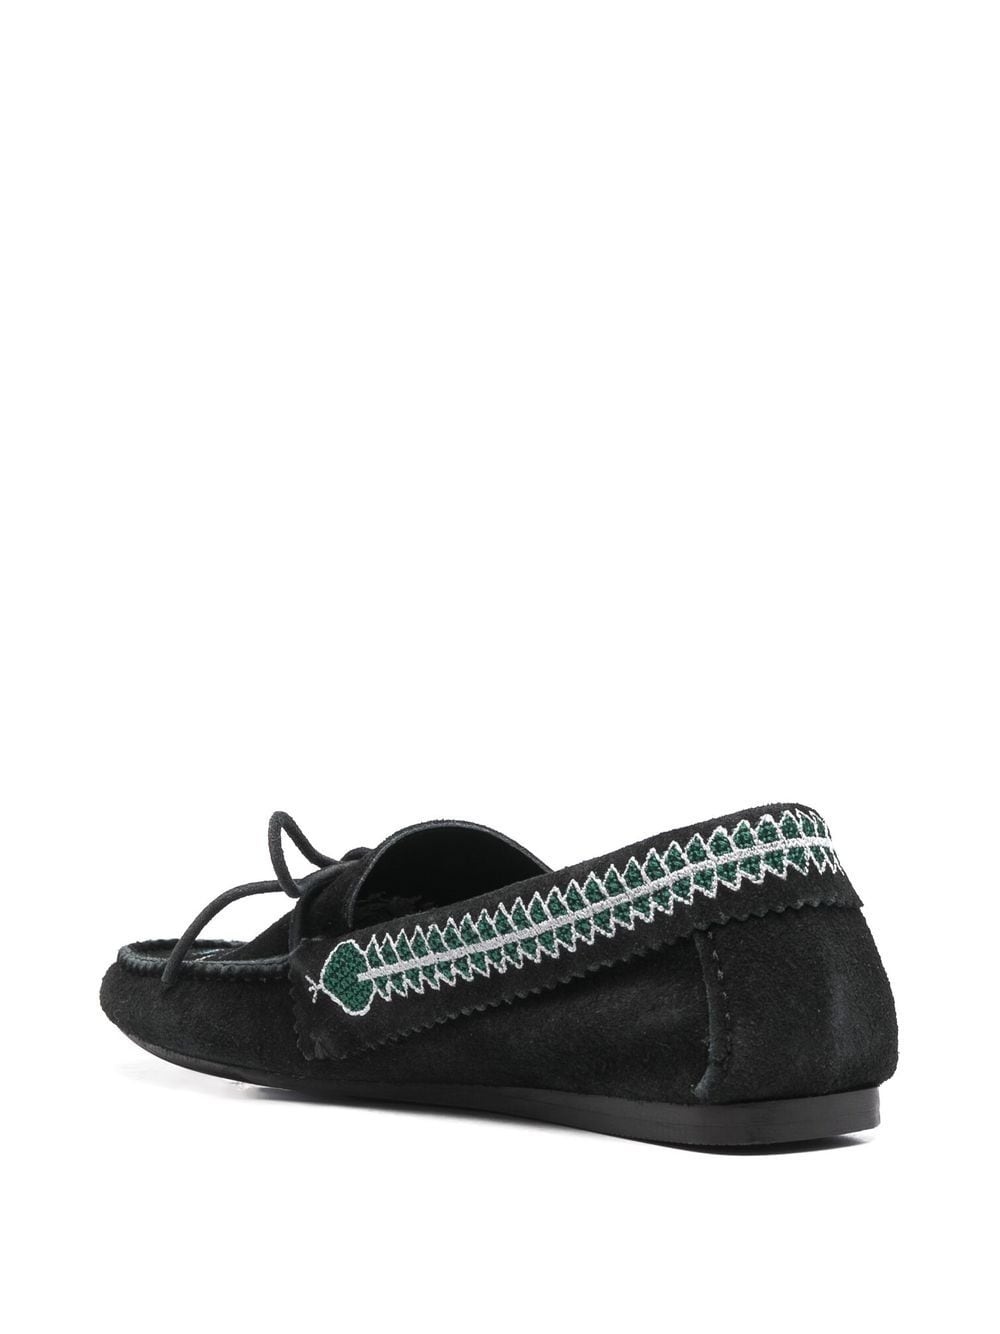 Freen embroidered loafers - 2